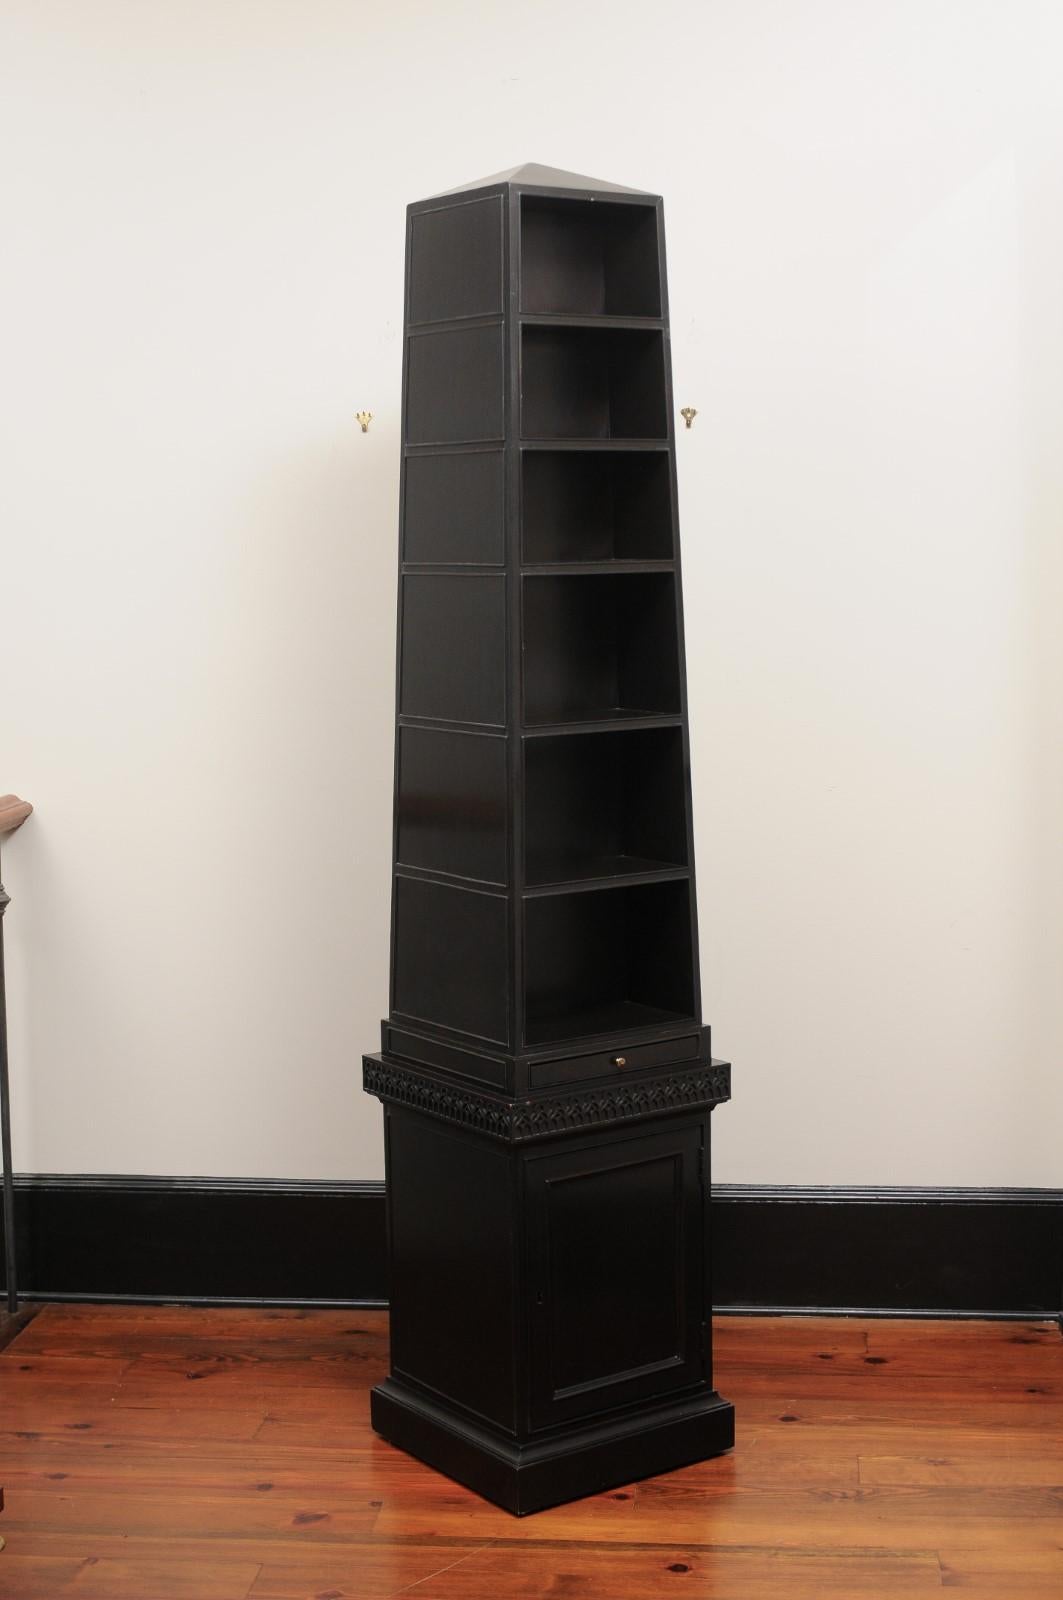 A fine mahogany four- sided bookcase, formed as an obelisk or pyramid on a roller base to reveal various compartments and shelves, with cupboards below on a square plinth, the entire bookcase decorated and designed with finely carved fretwork.